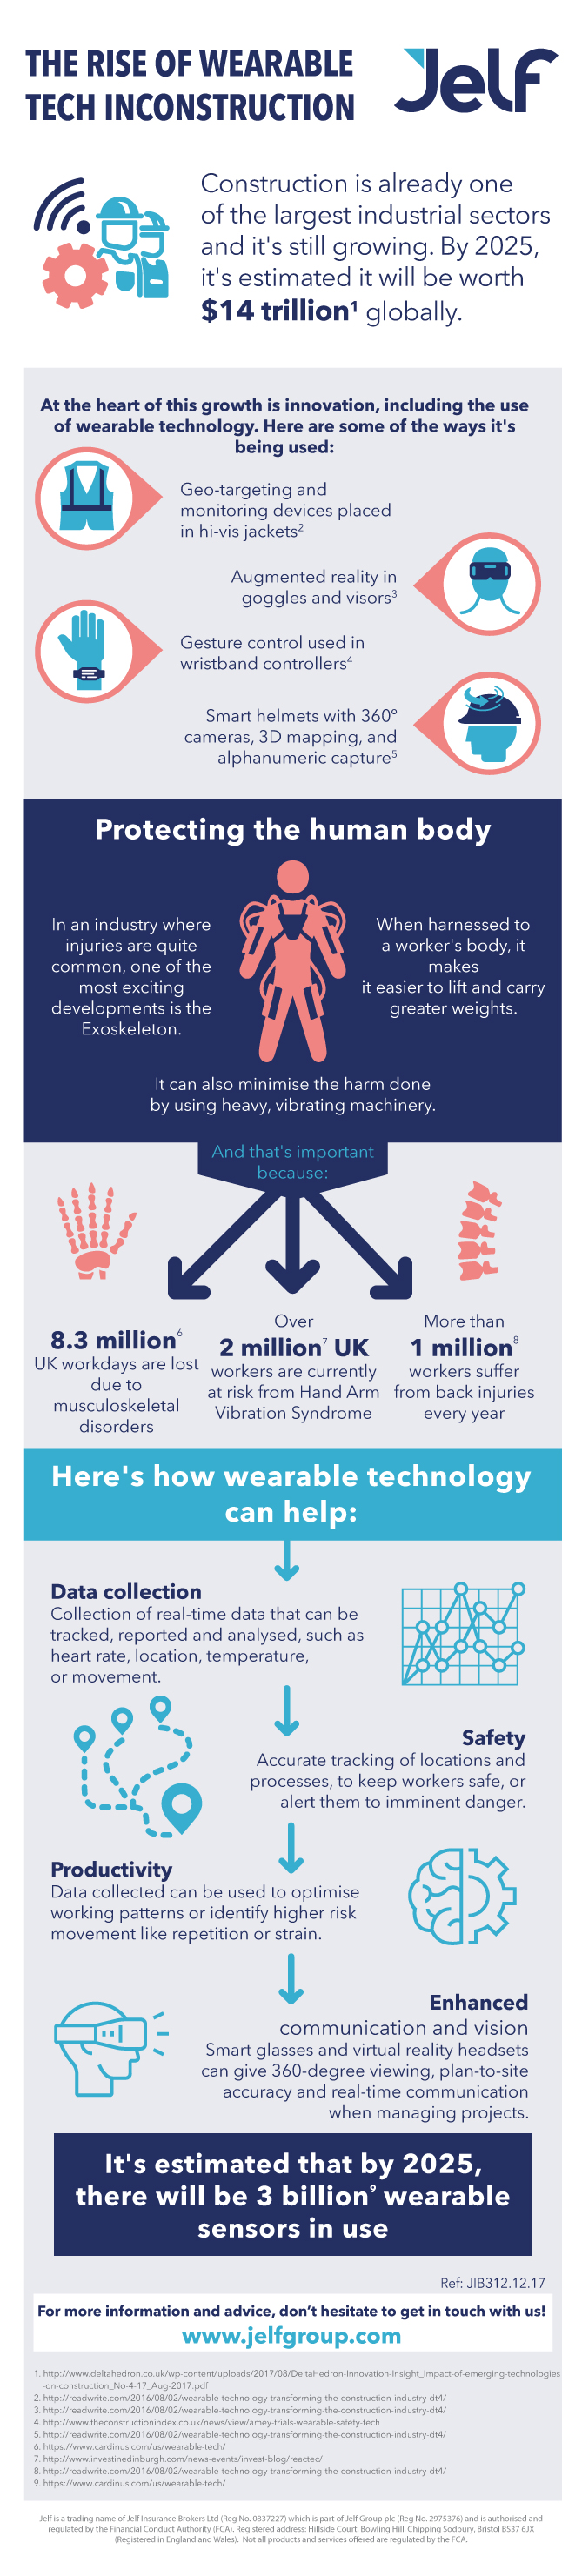 infographic for construction wearable tech